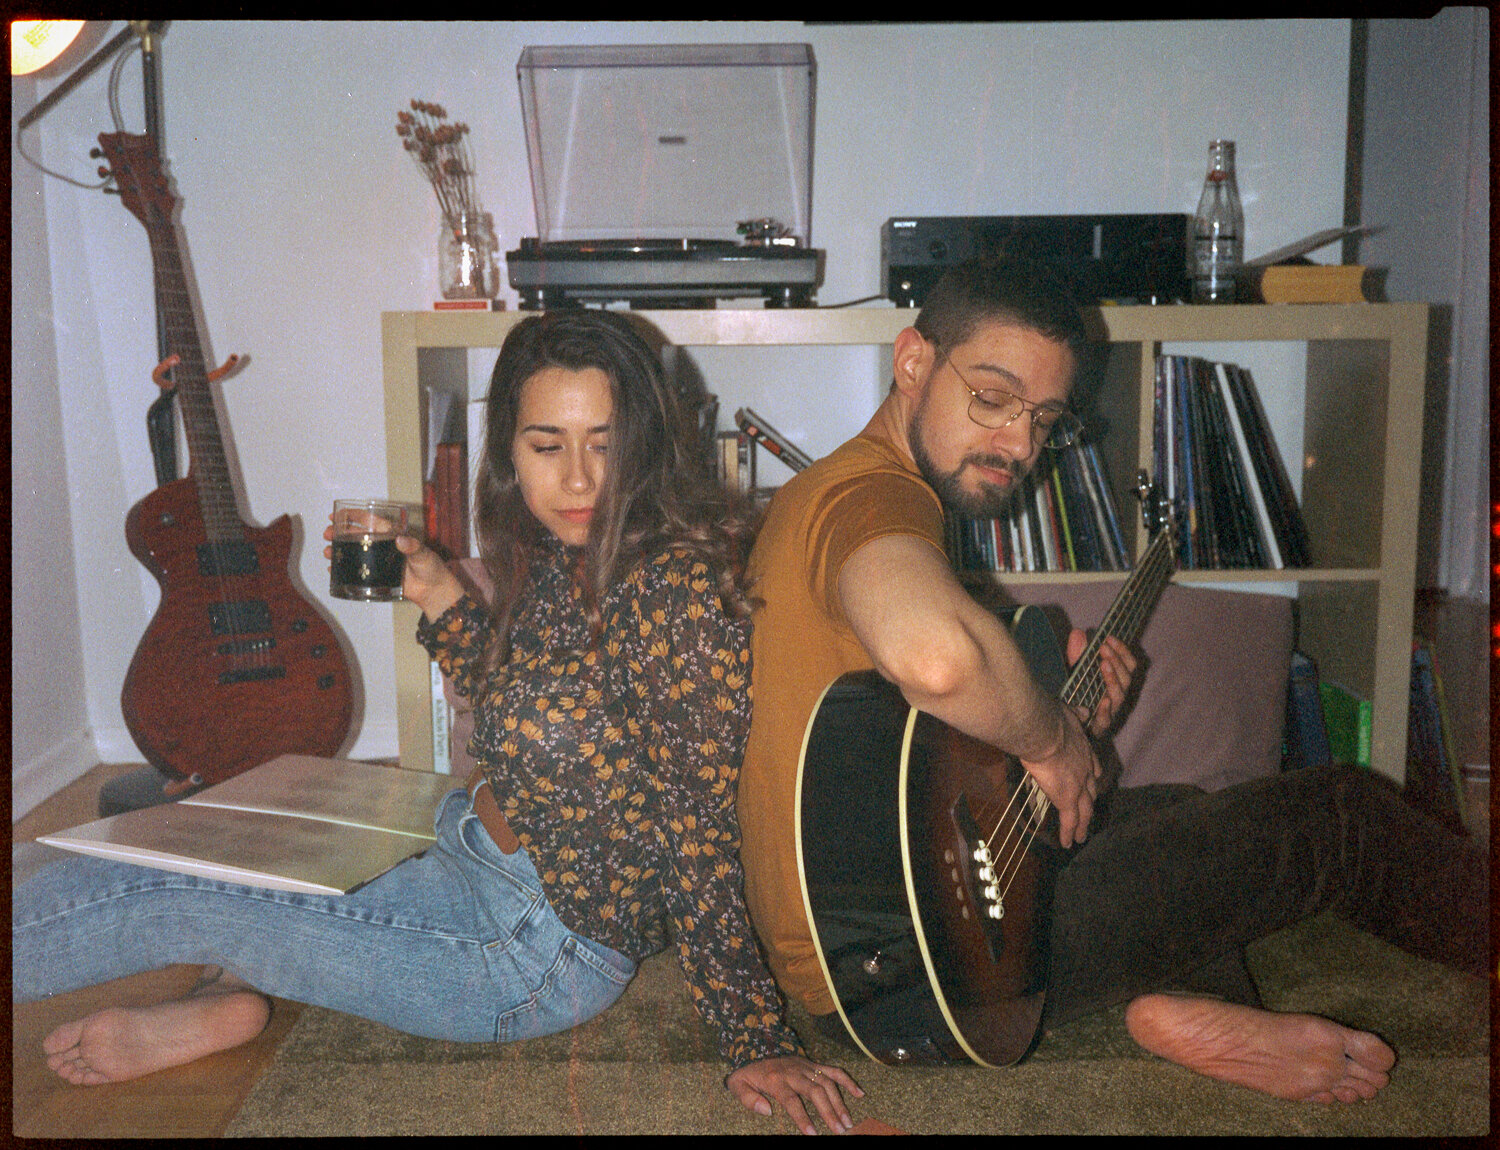 Vintage-Cool-Hipster-Alternative-in-home-couples-engagement-photos-music-vinyl-in-toronto-10.JPG